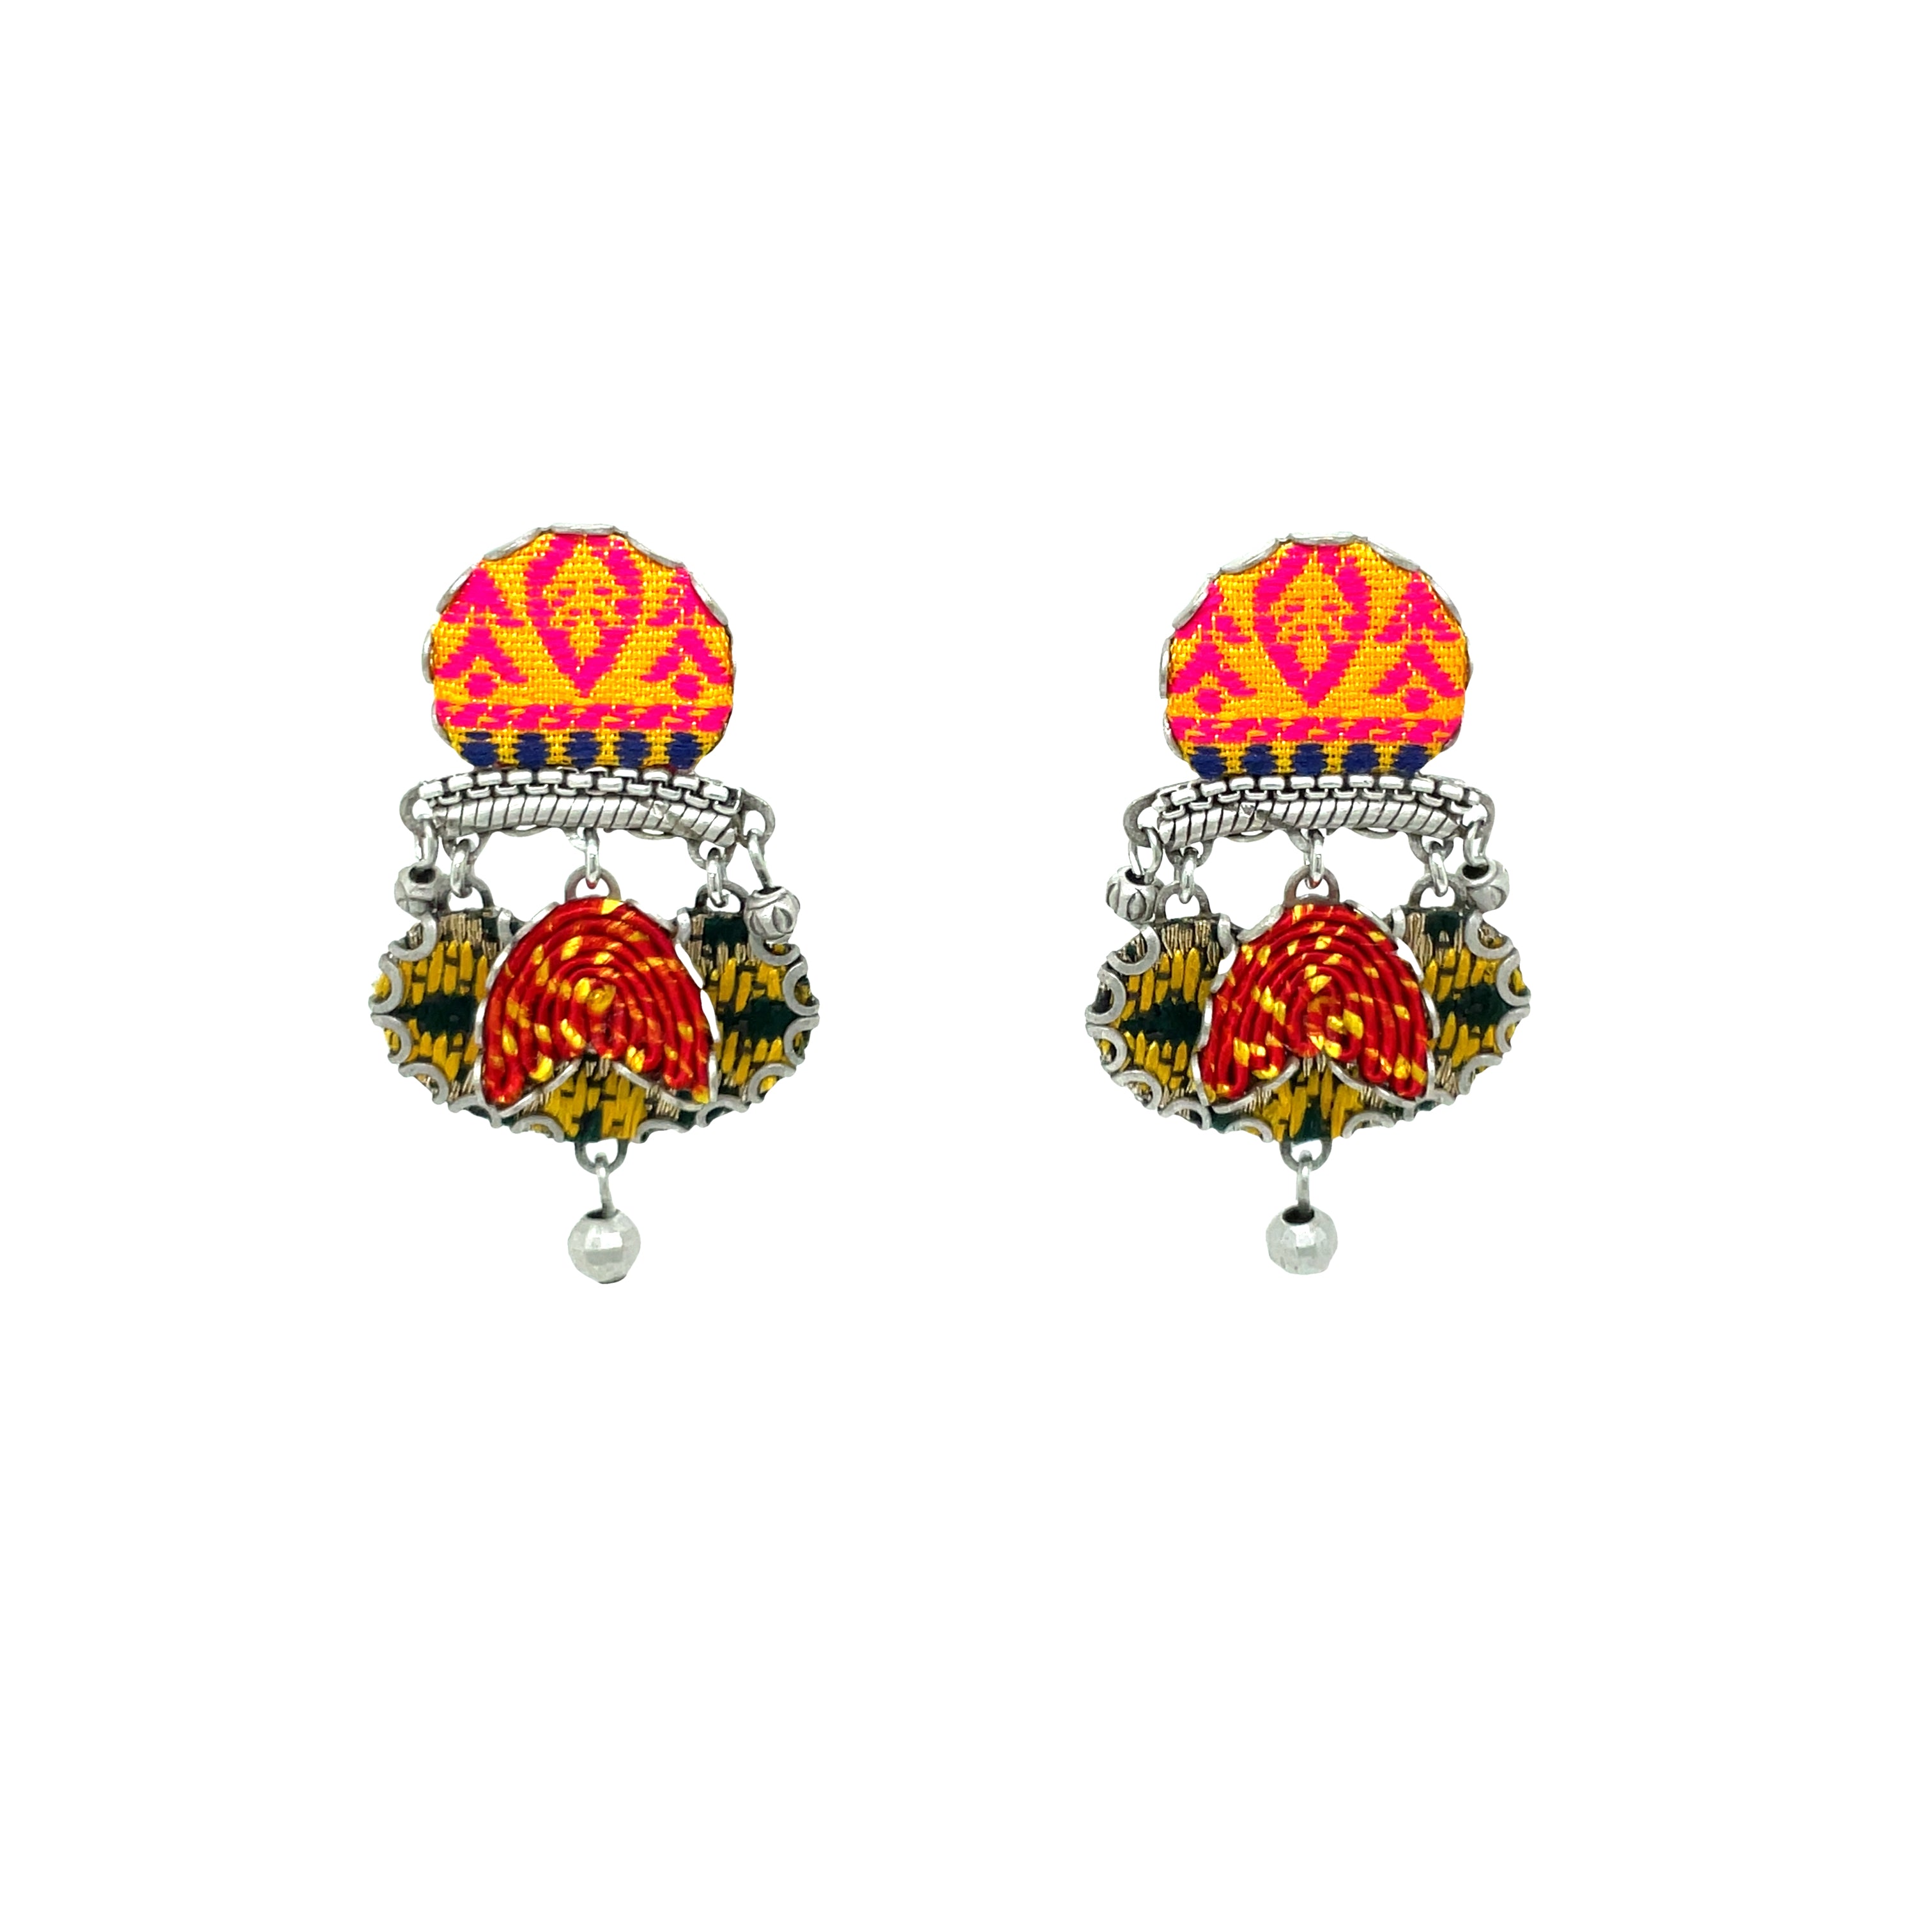 Handcrafted Fabric and Bead Earrings